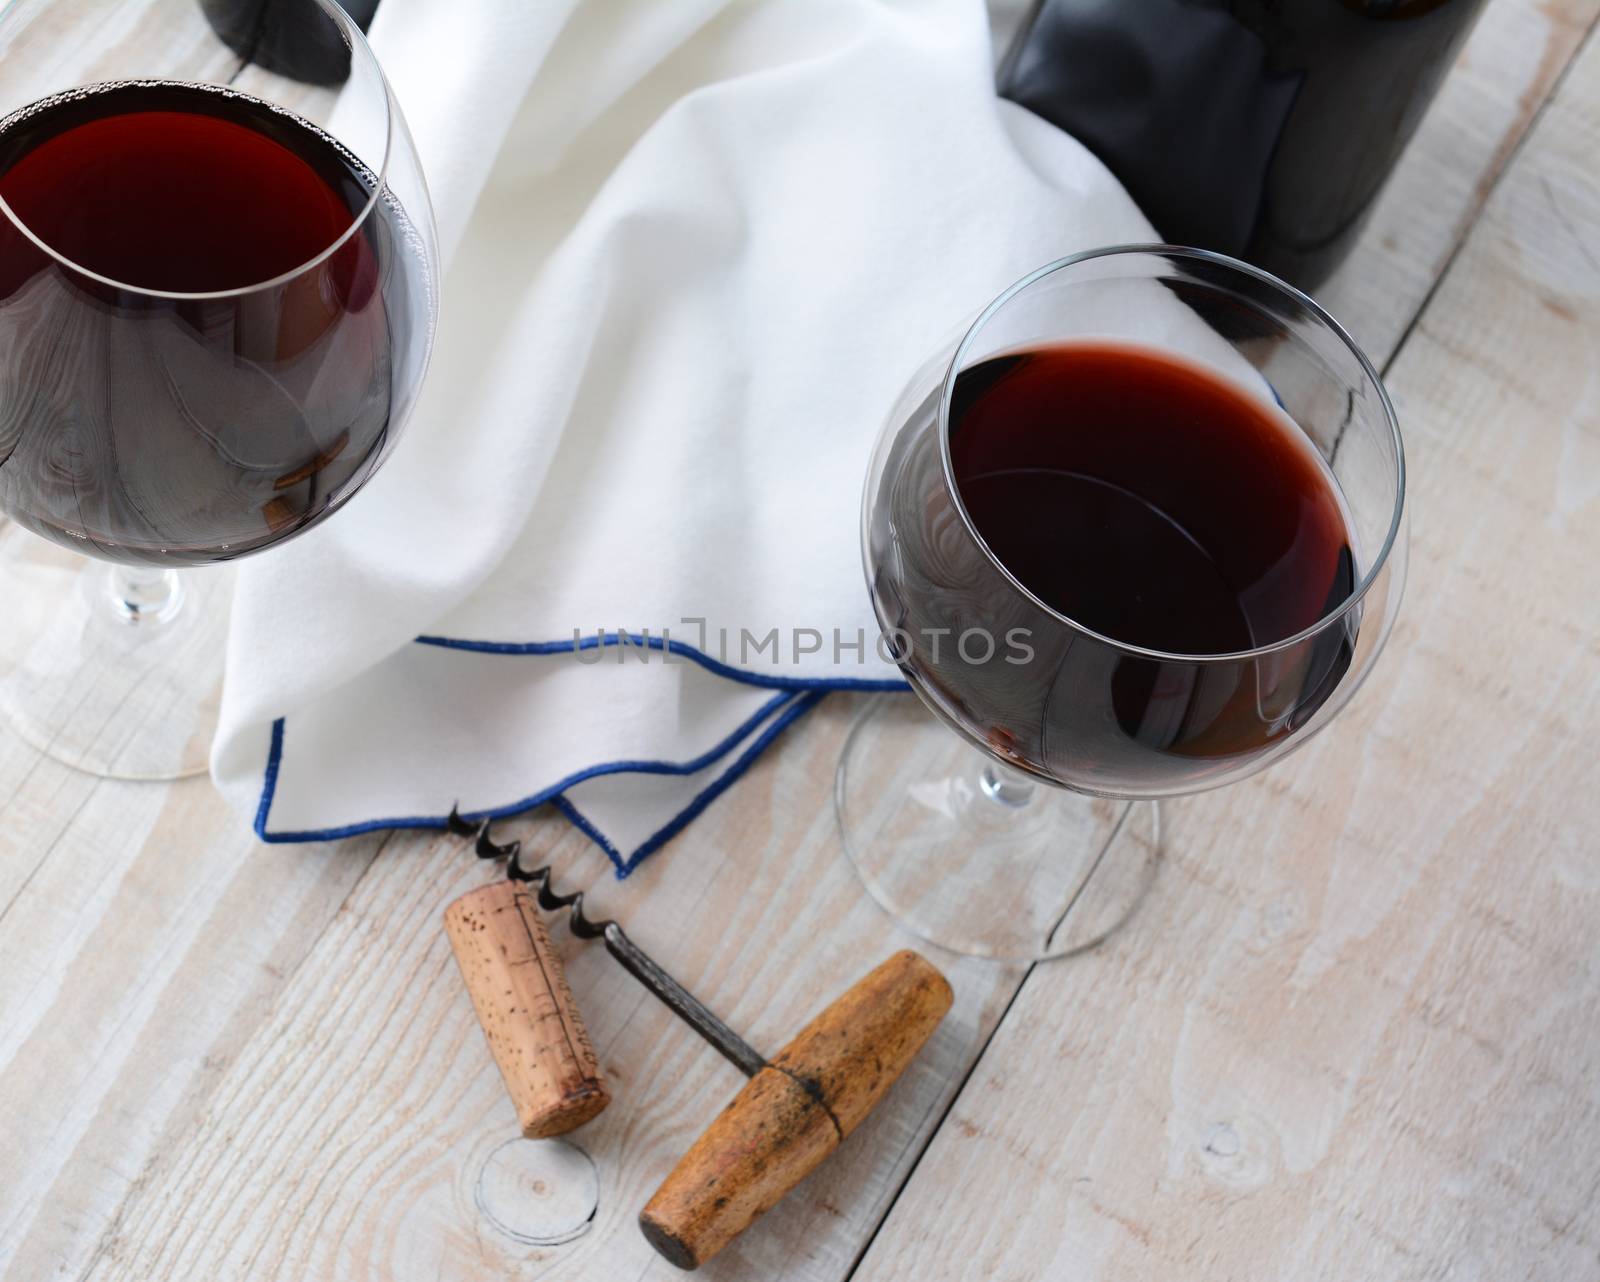 Two wineglasses of red wine on a wood table with antique cork screw. Horizontal format shot from a high angle.